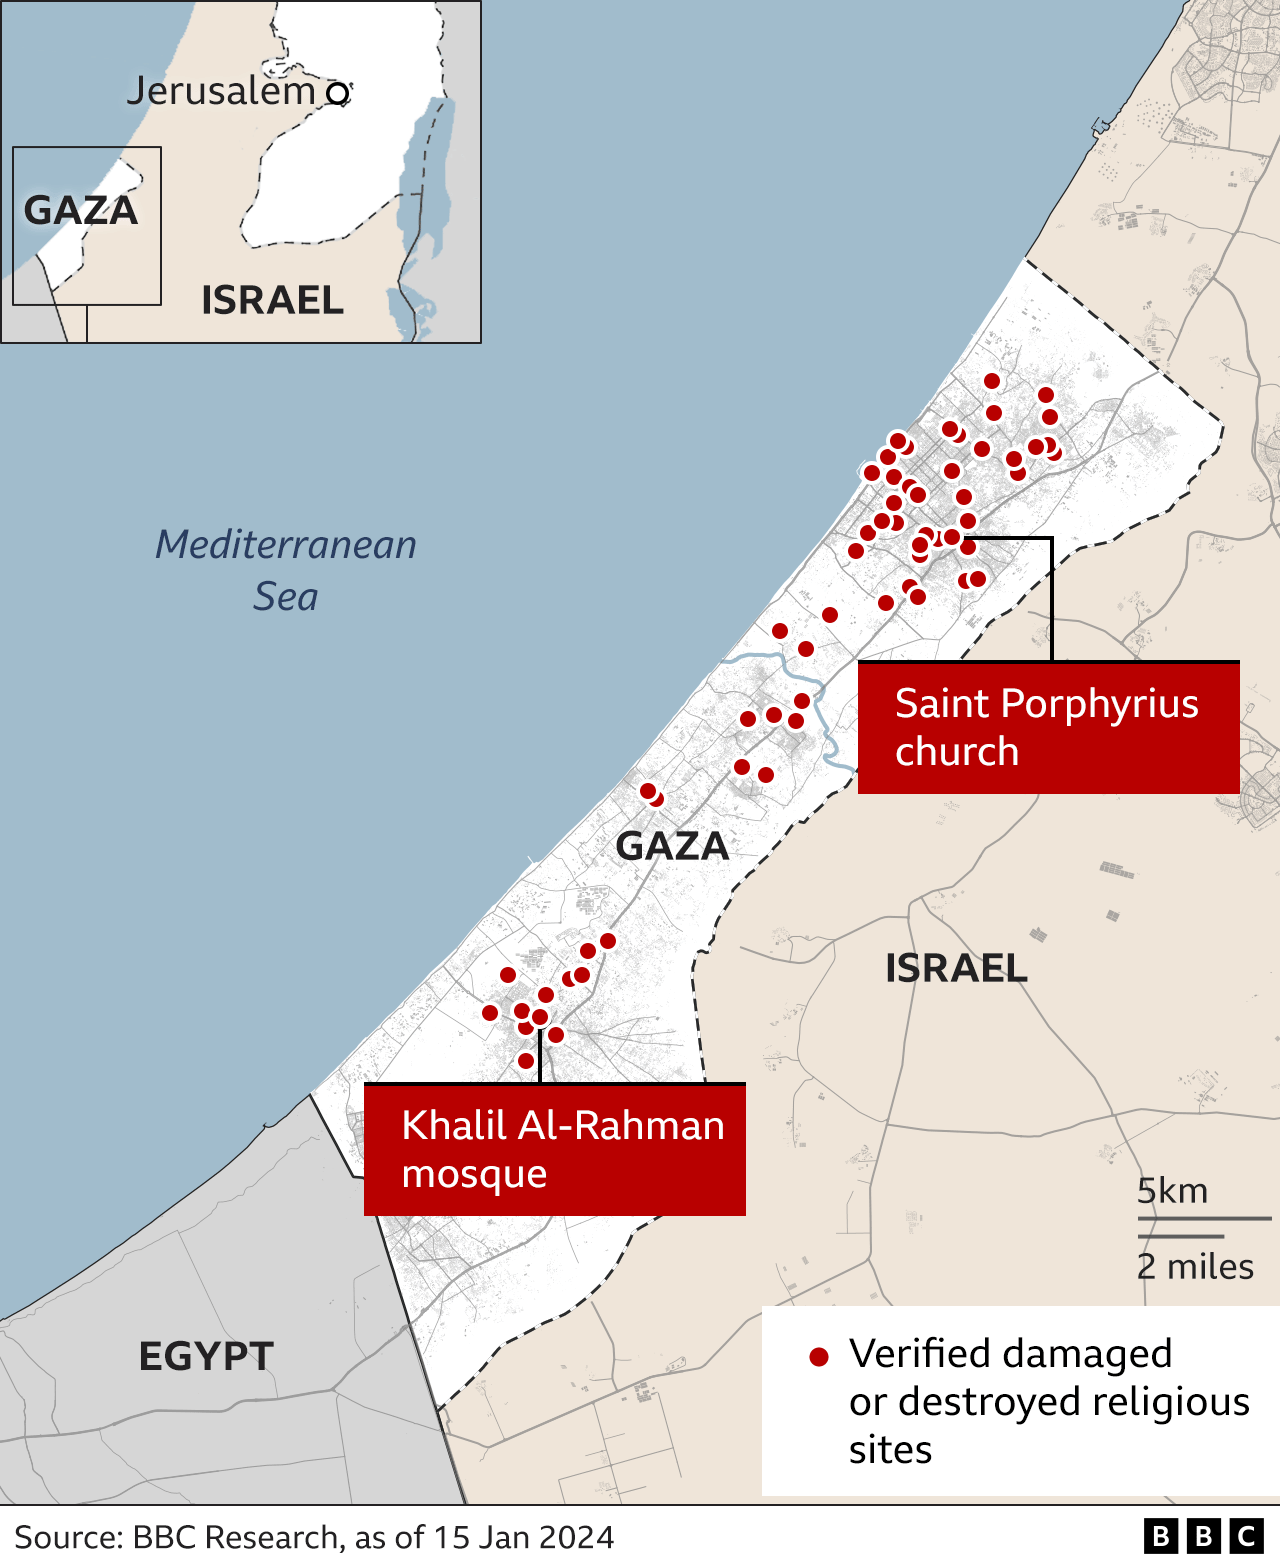 A map showing the locations of destroyed/damaged mosques and churches in Gaza